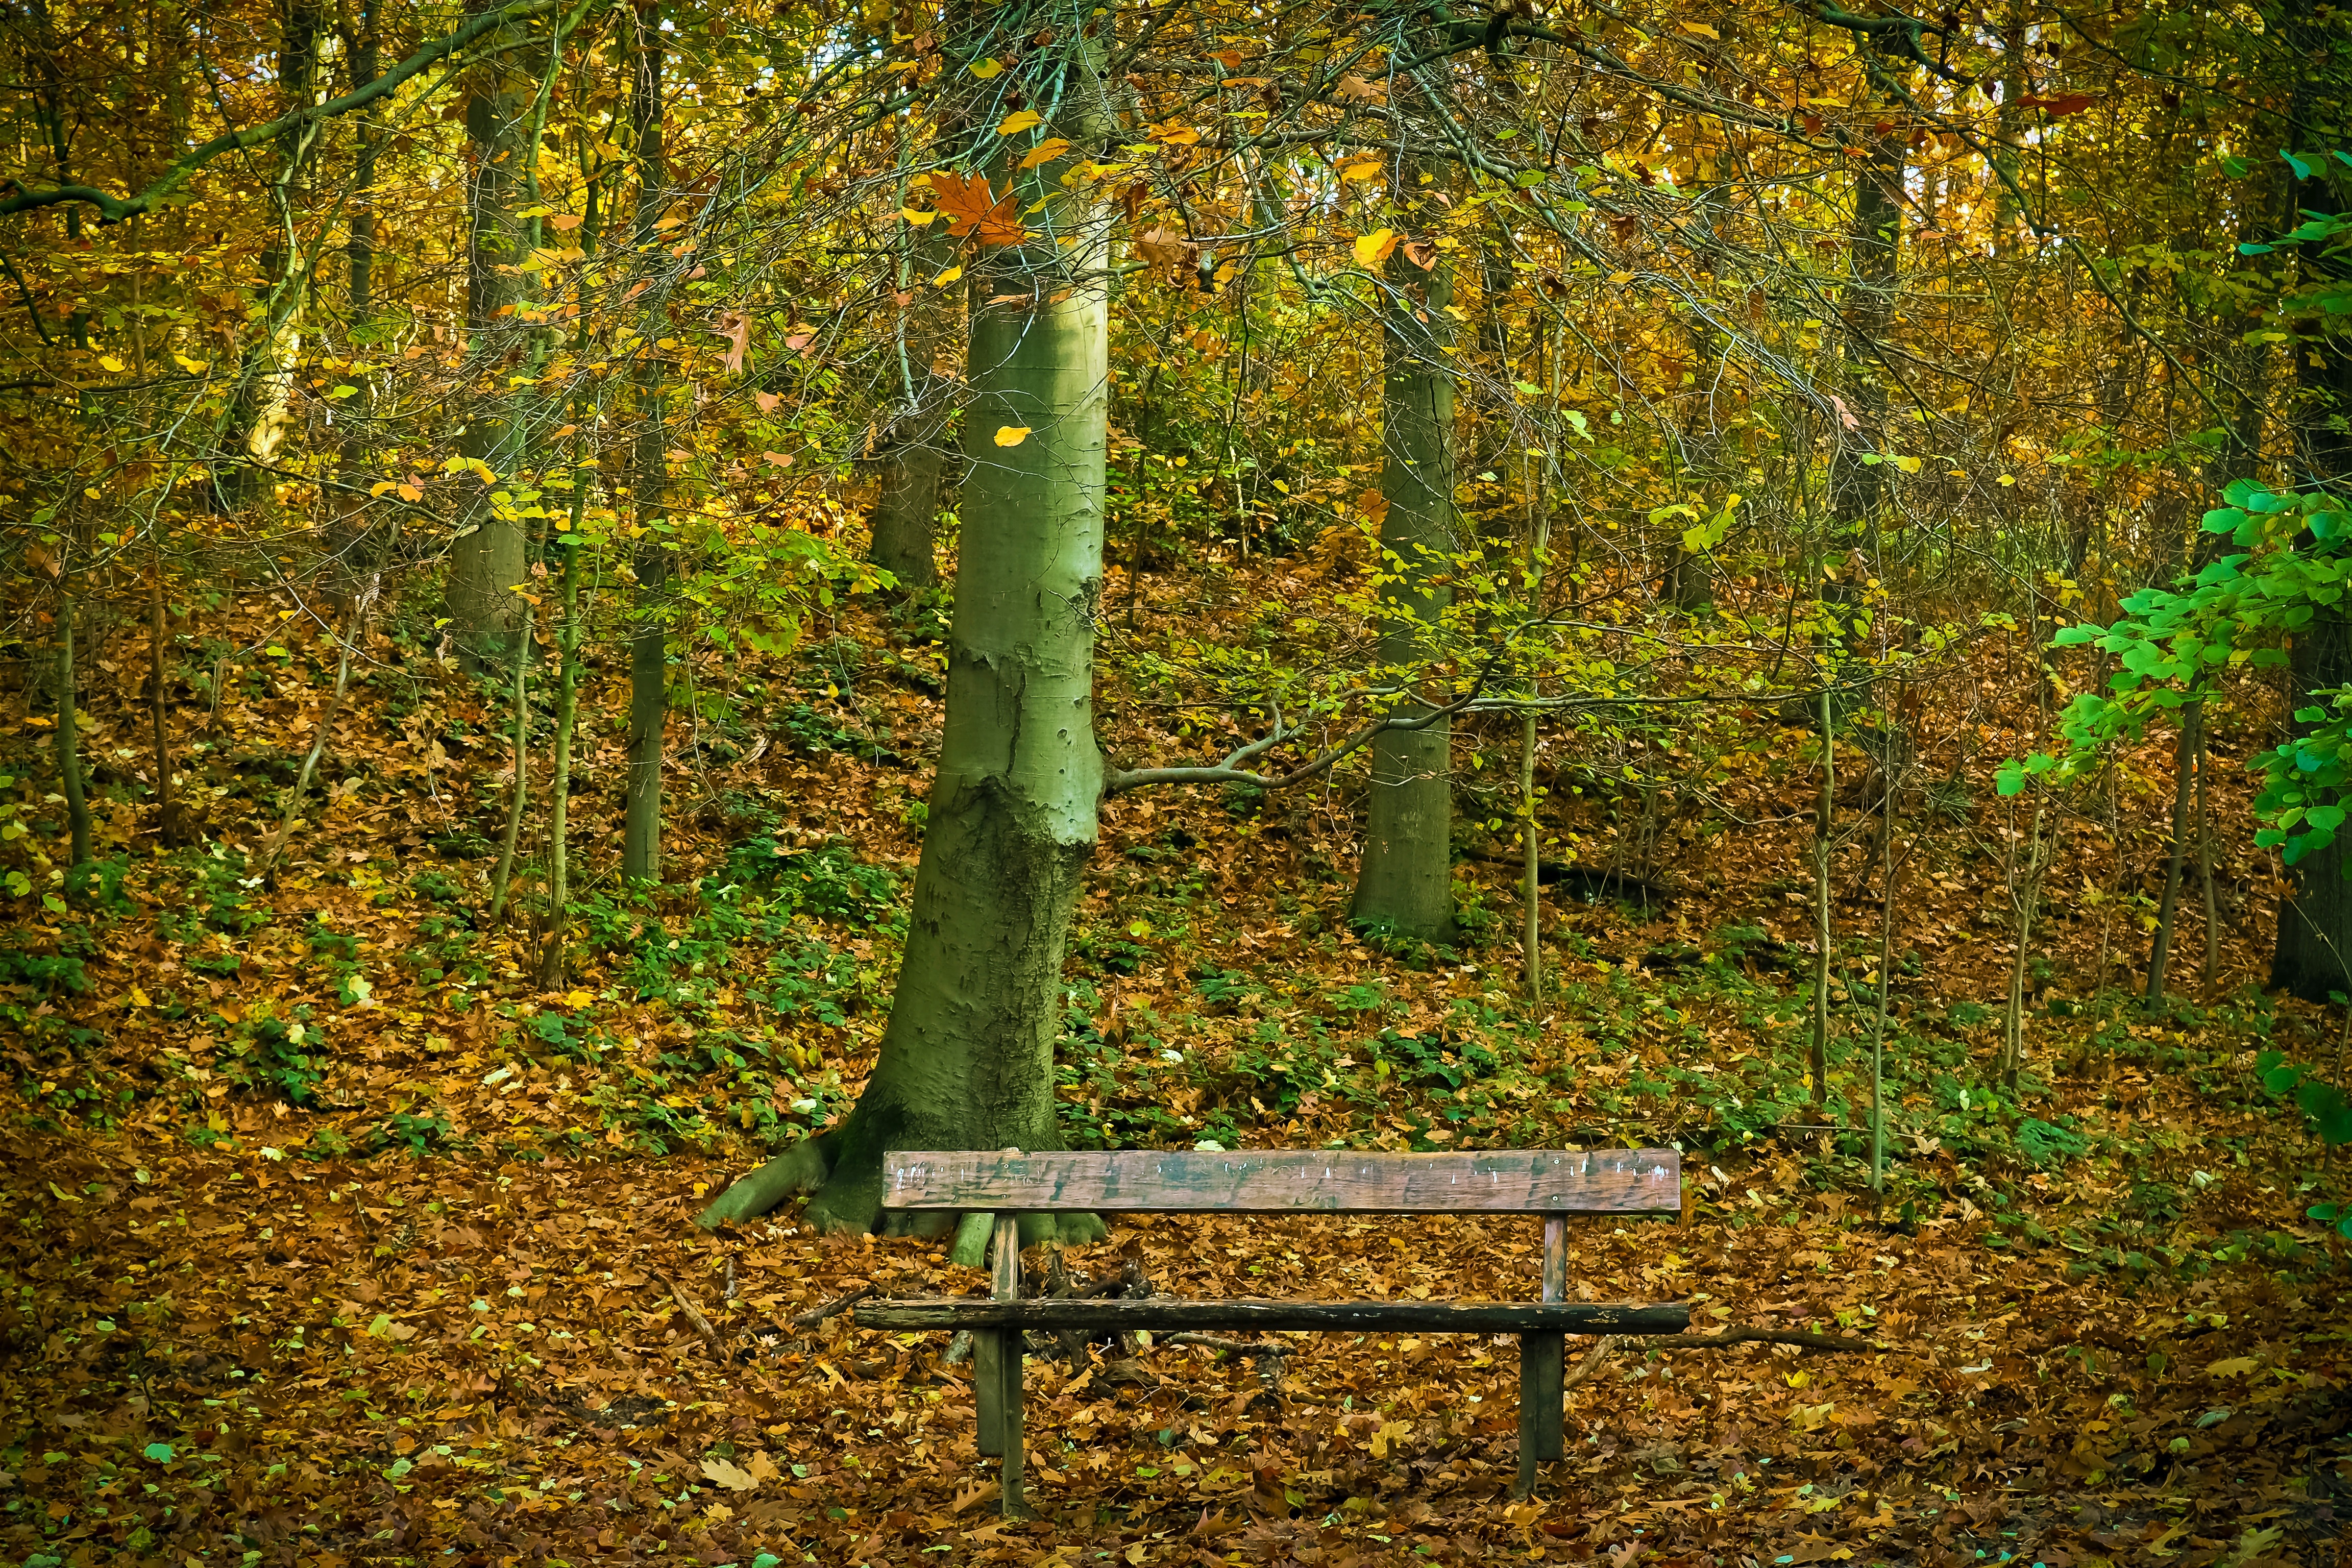 Bench in Park during Autumn, Autumn, Nature, Wooden bench, Trunks, HQ Photo